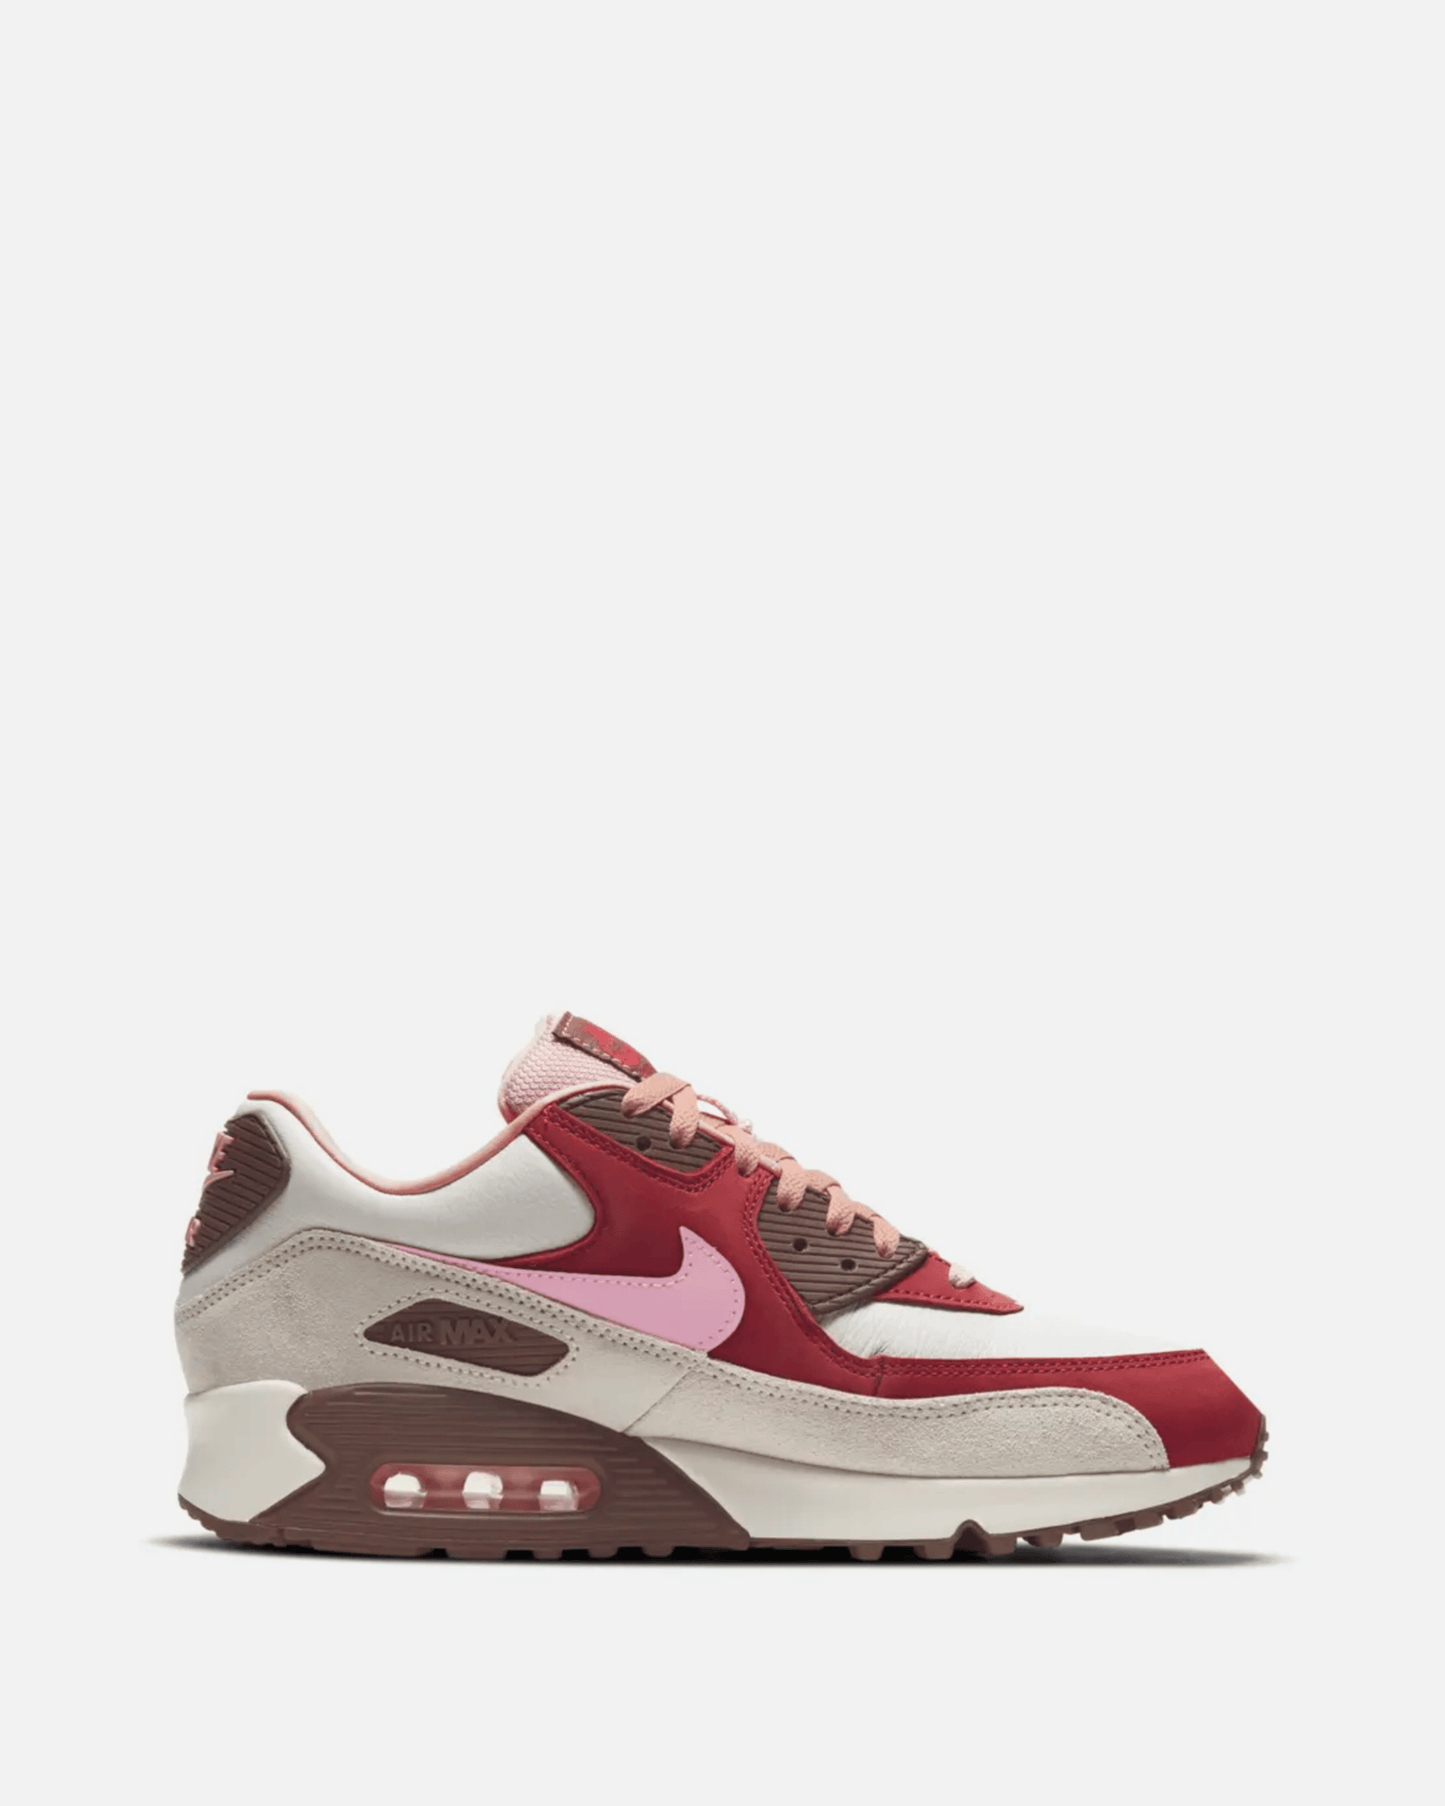 Nike Releases Air Max 90 NRG 'Bacon'